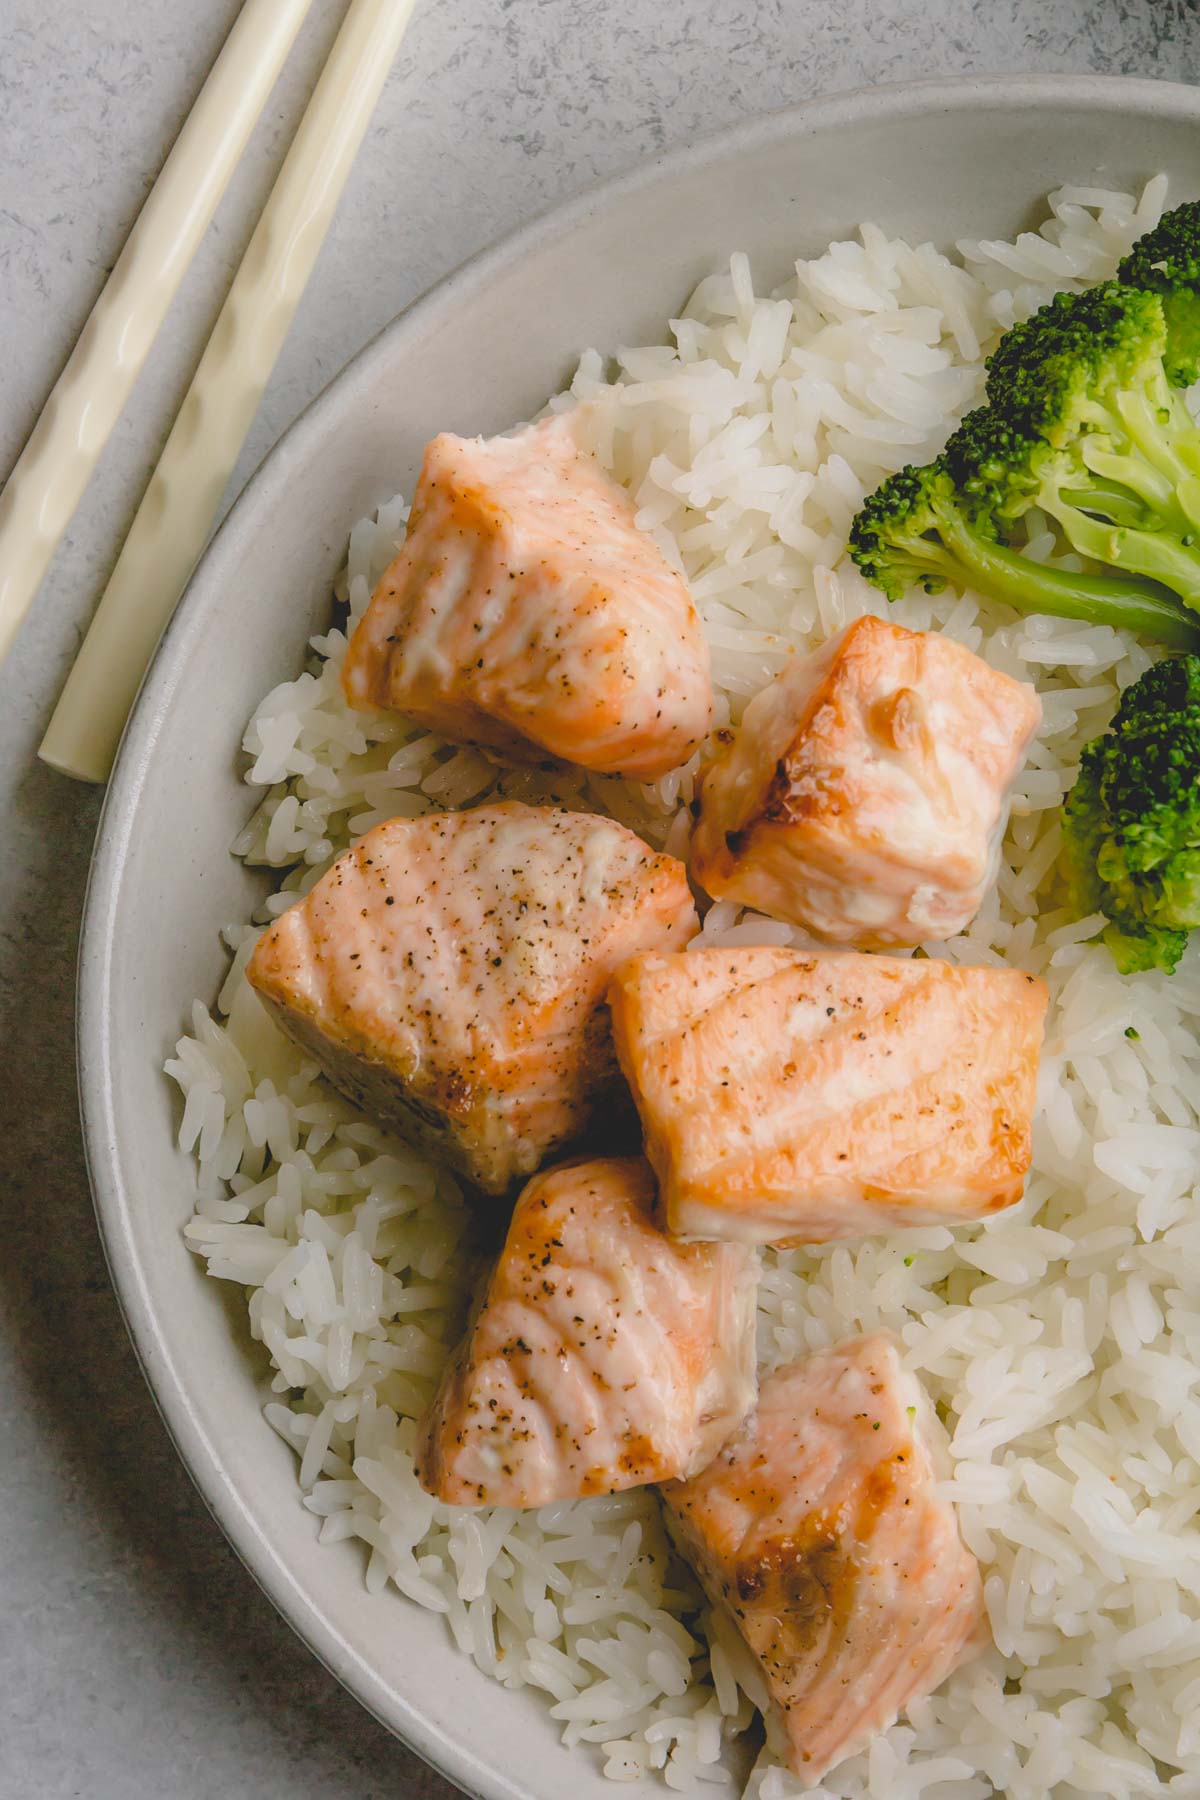 Baked salmon chunks over a bed of white rice with steamed broccoli.